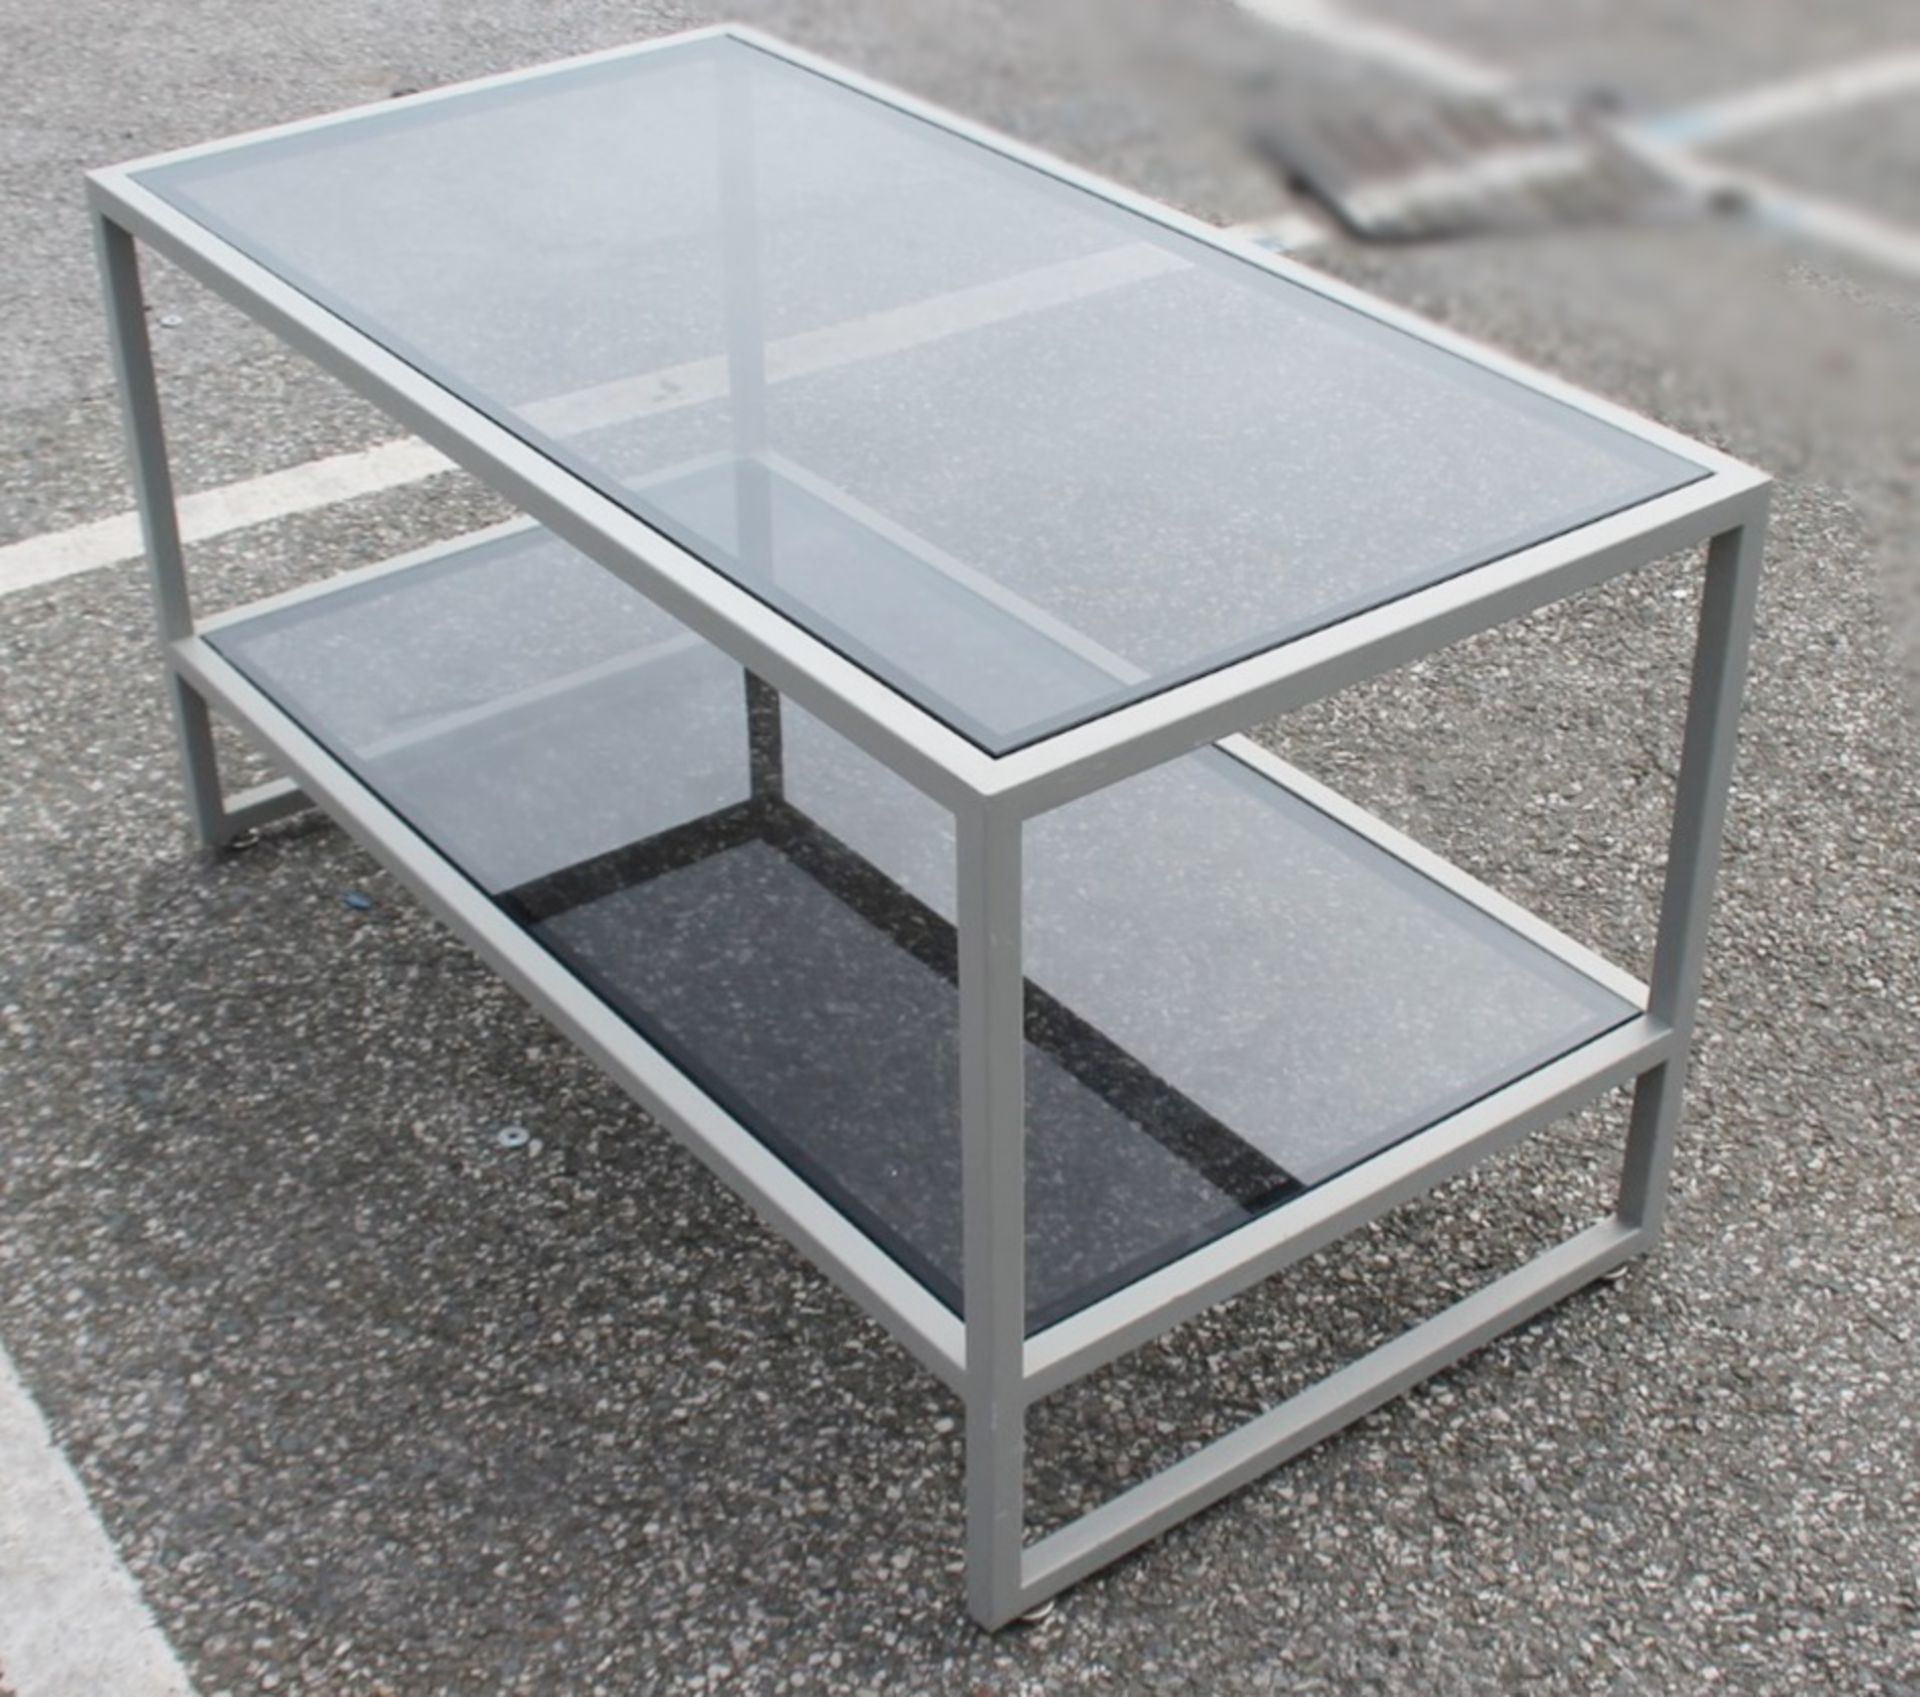 1 x Commercial Display Table With Tinted Glass Top And Undershelf - Image 2 of 4